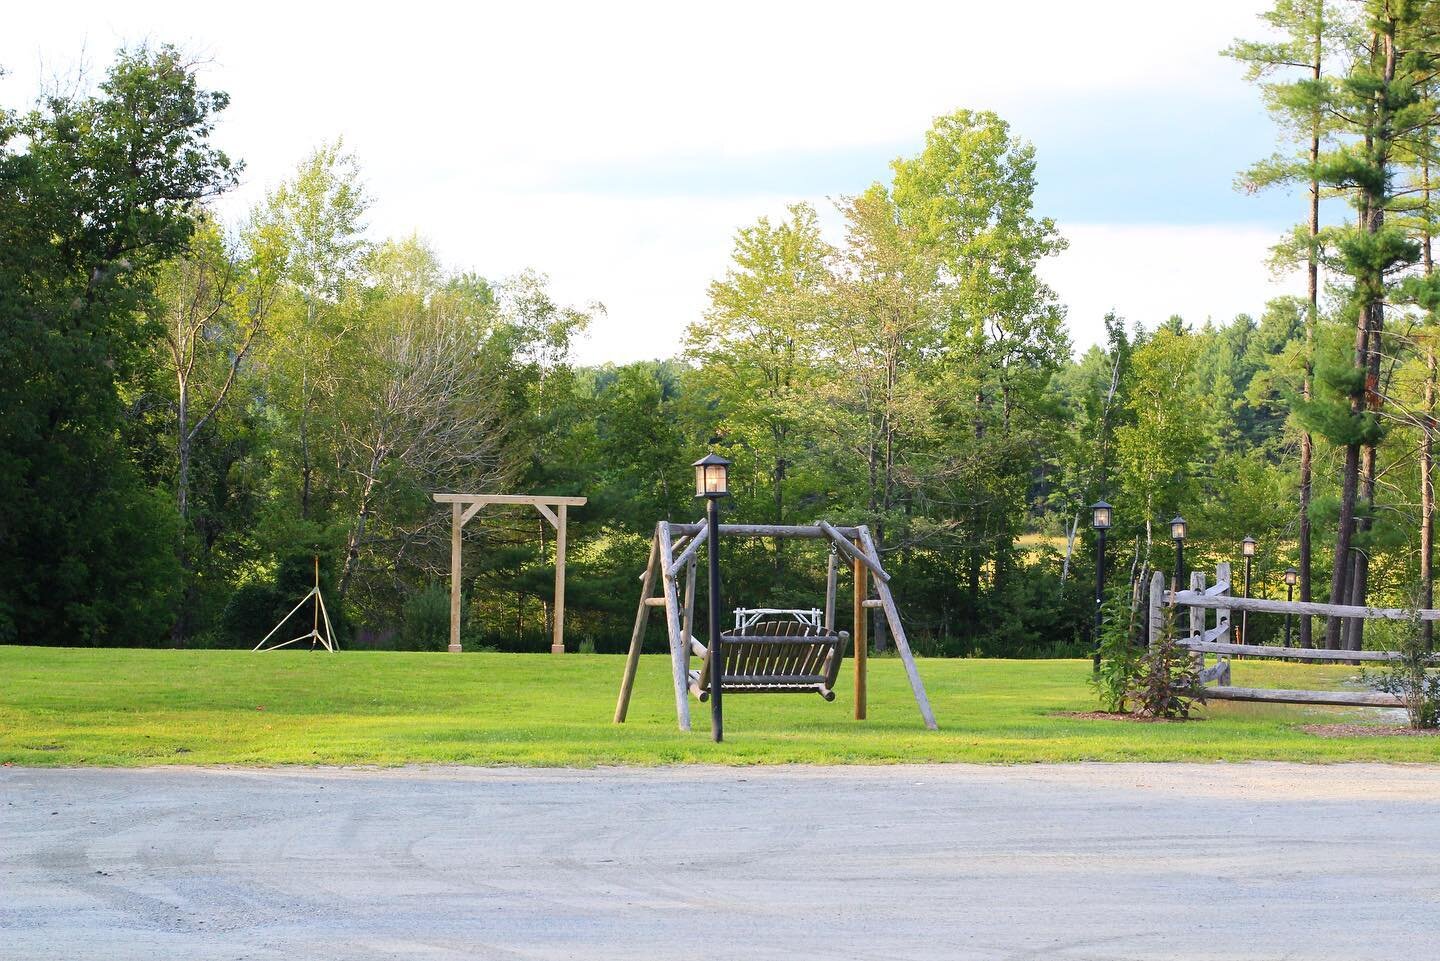 The beautiful weather today makes us want summer sooner! #dowdscountryinn #beautifulday #spring #yardswing